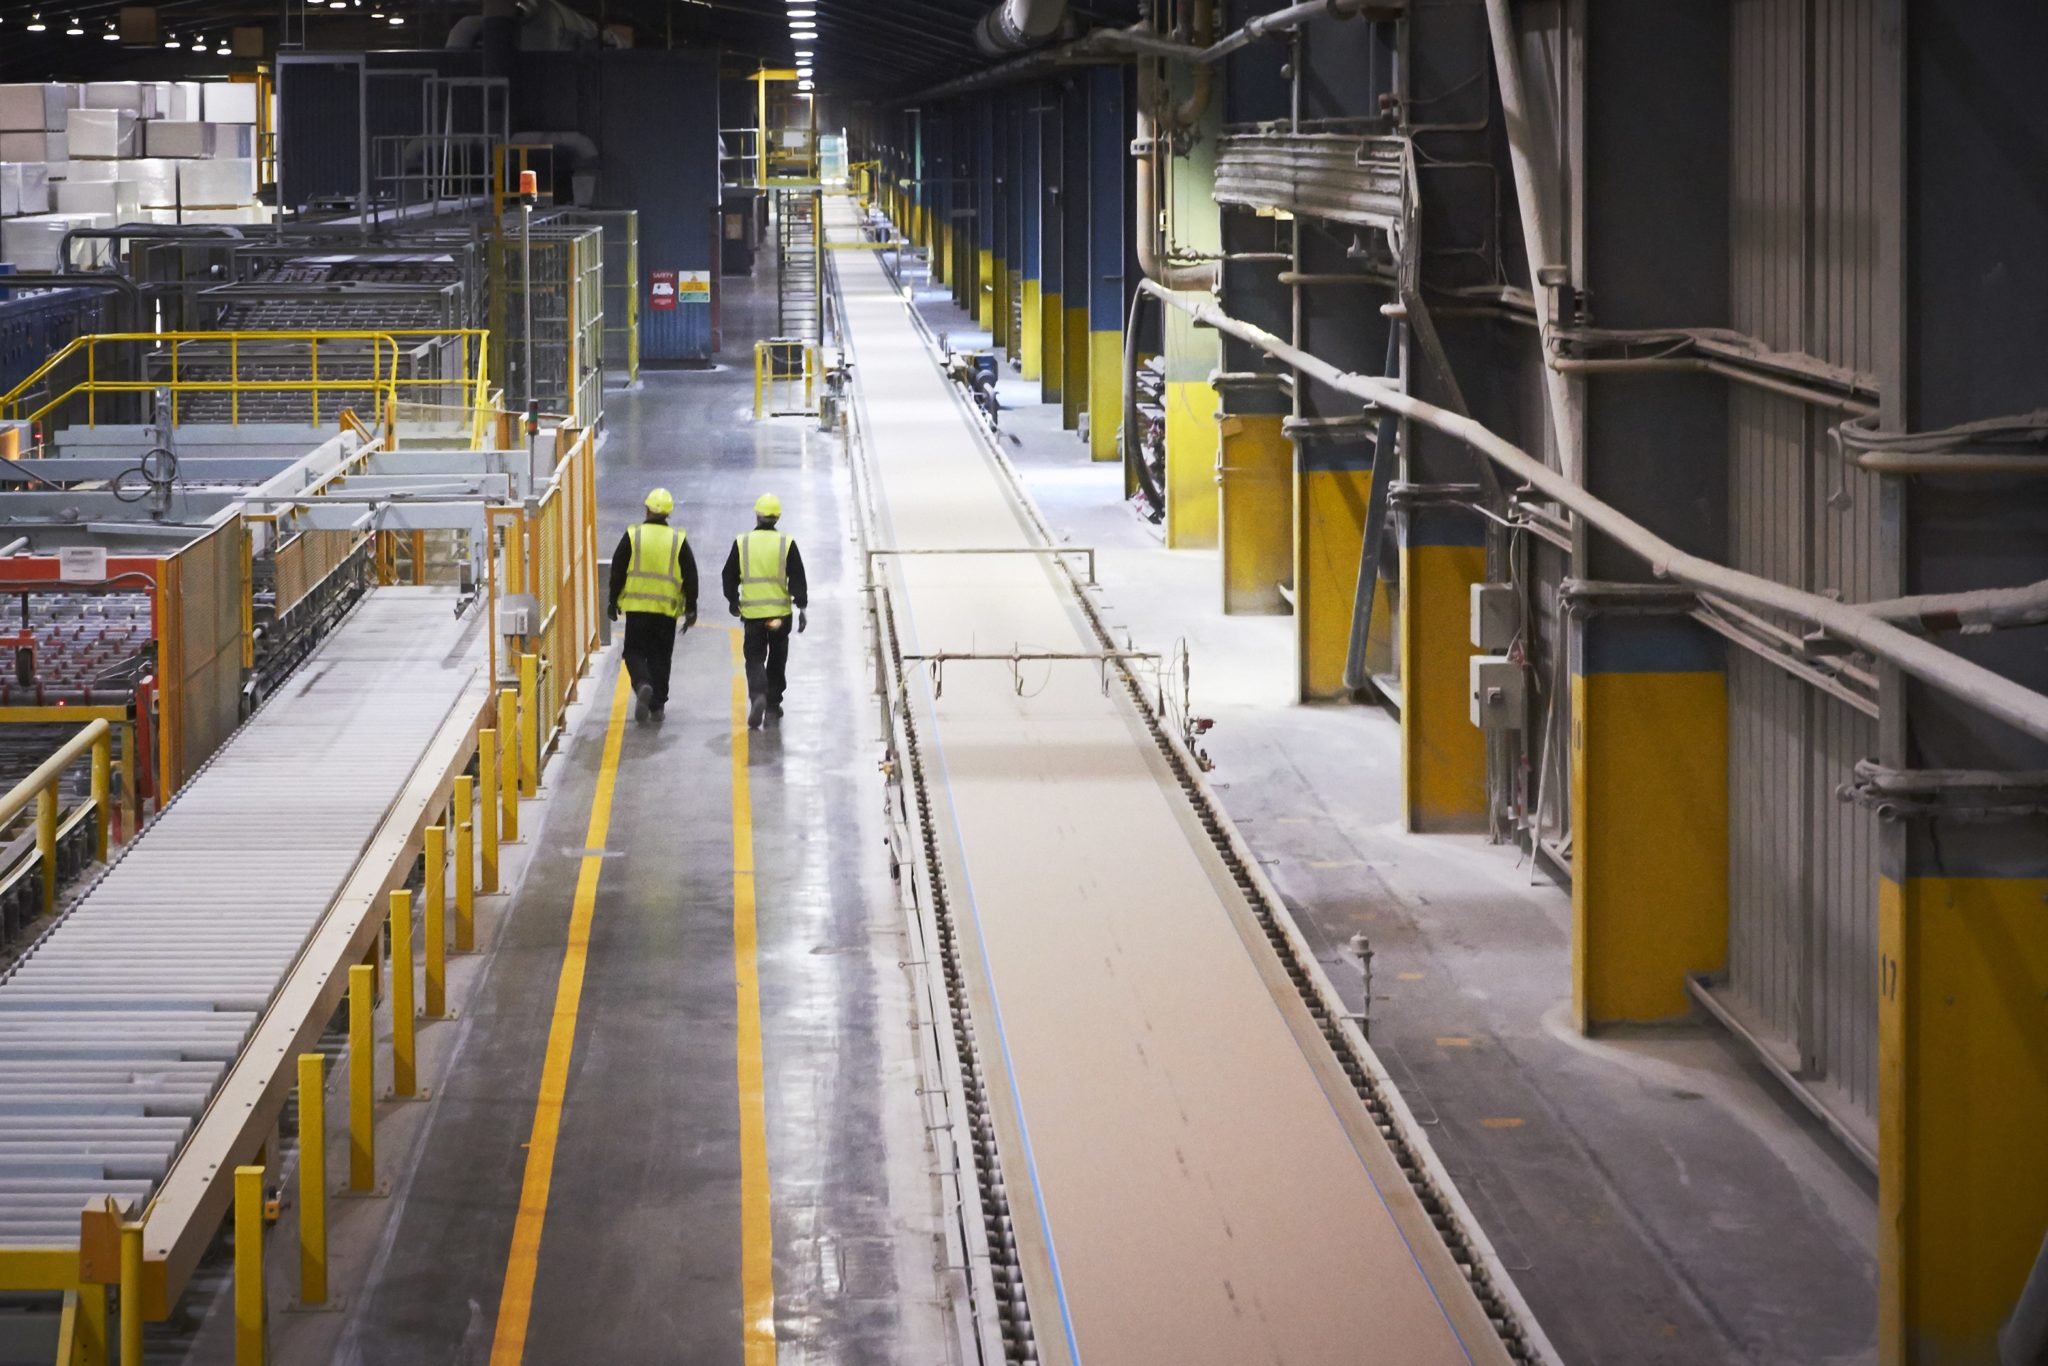 Etex £140m plan to double plasterboard production